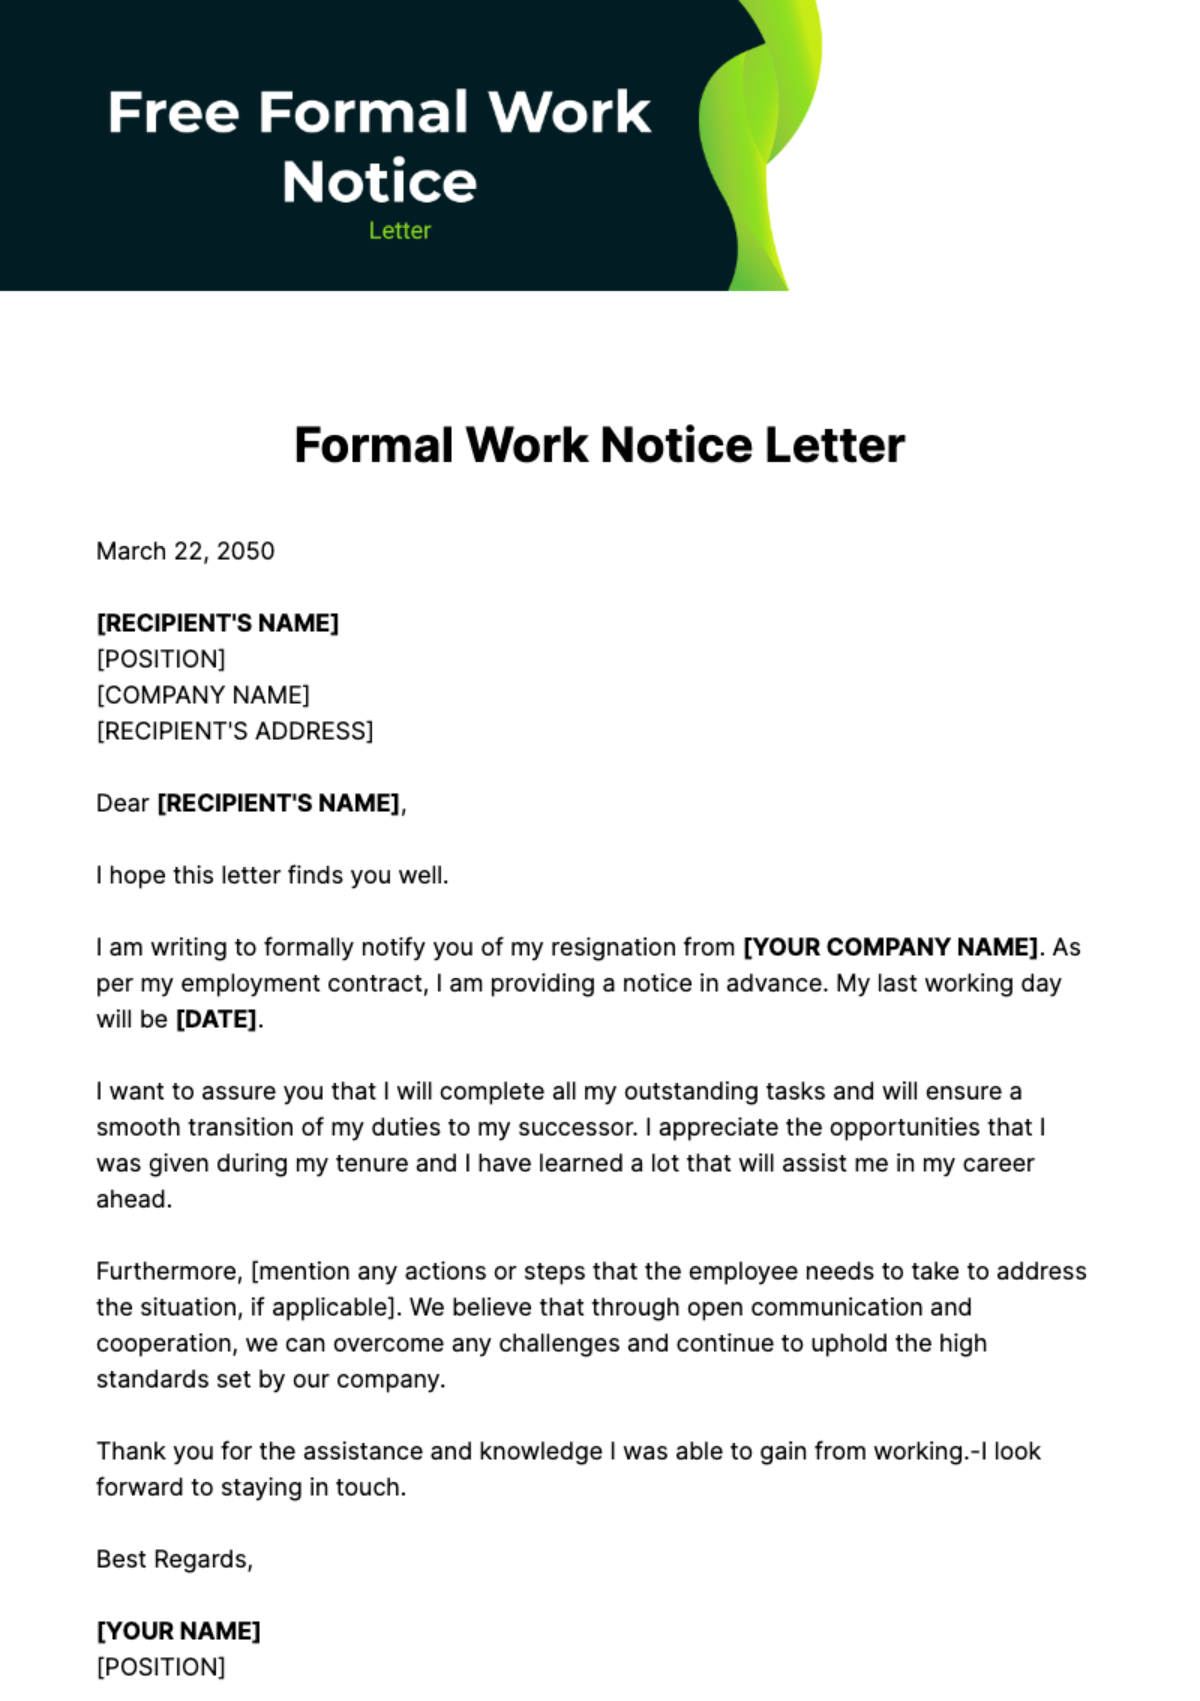 Free Formal Work Notice Letter Template